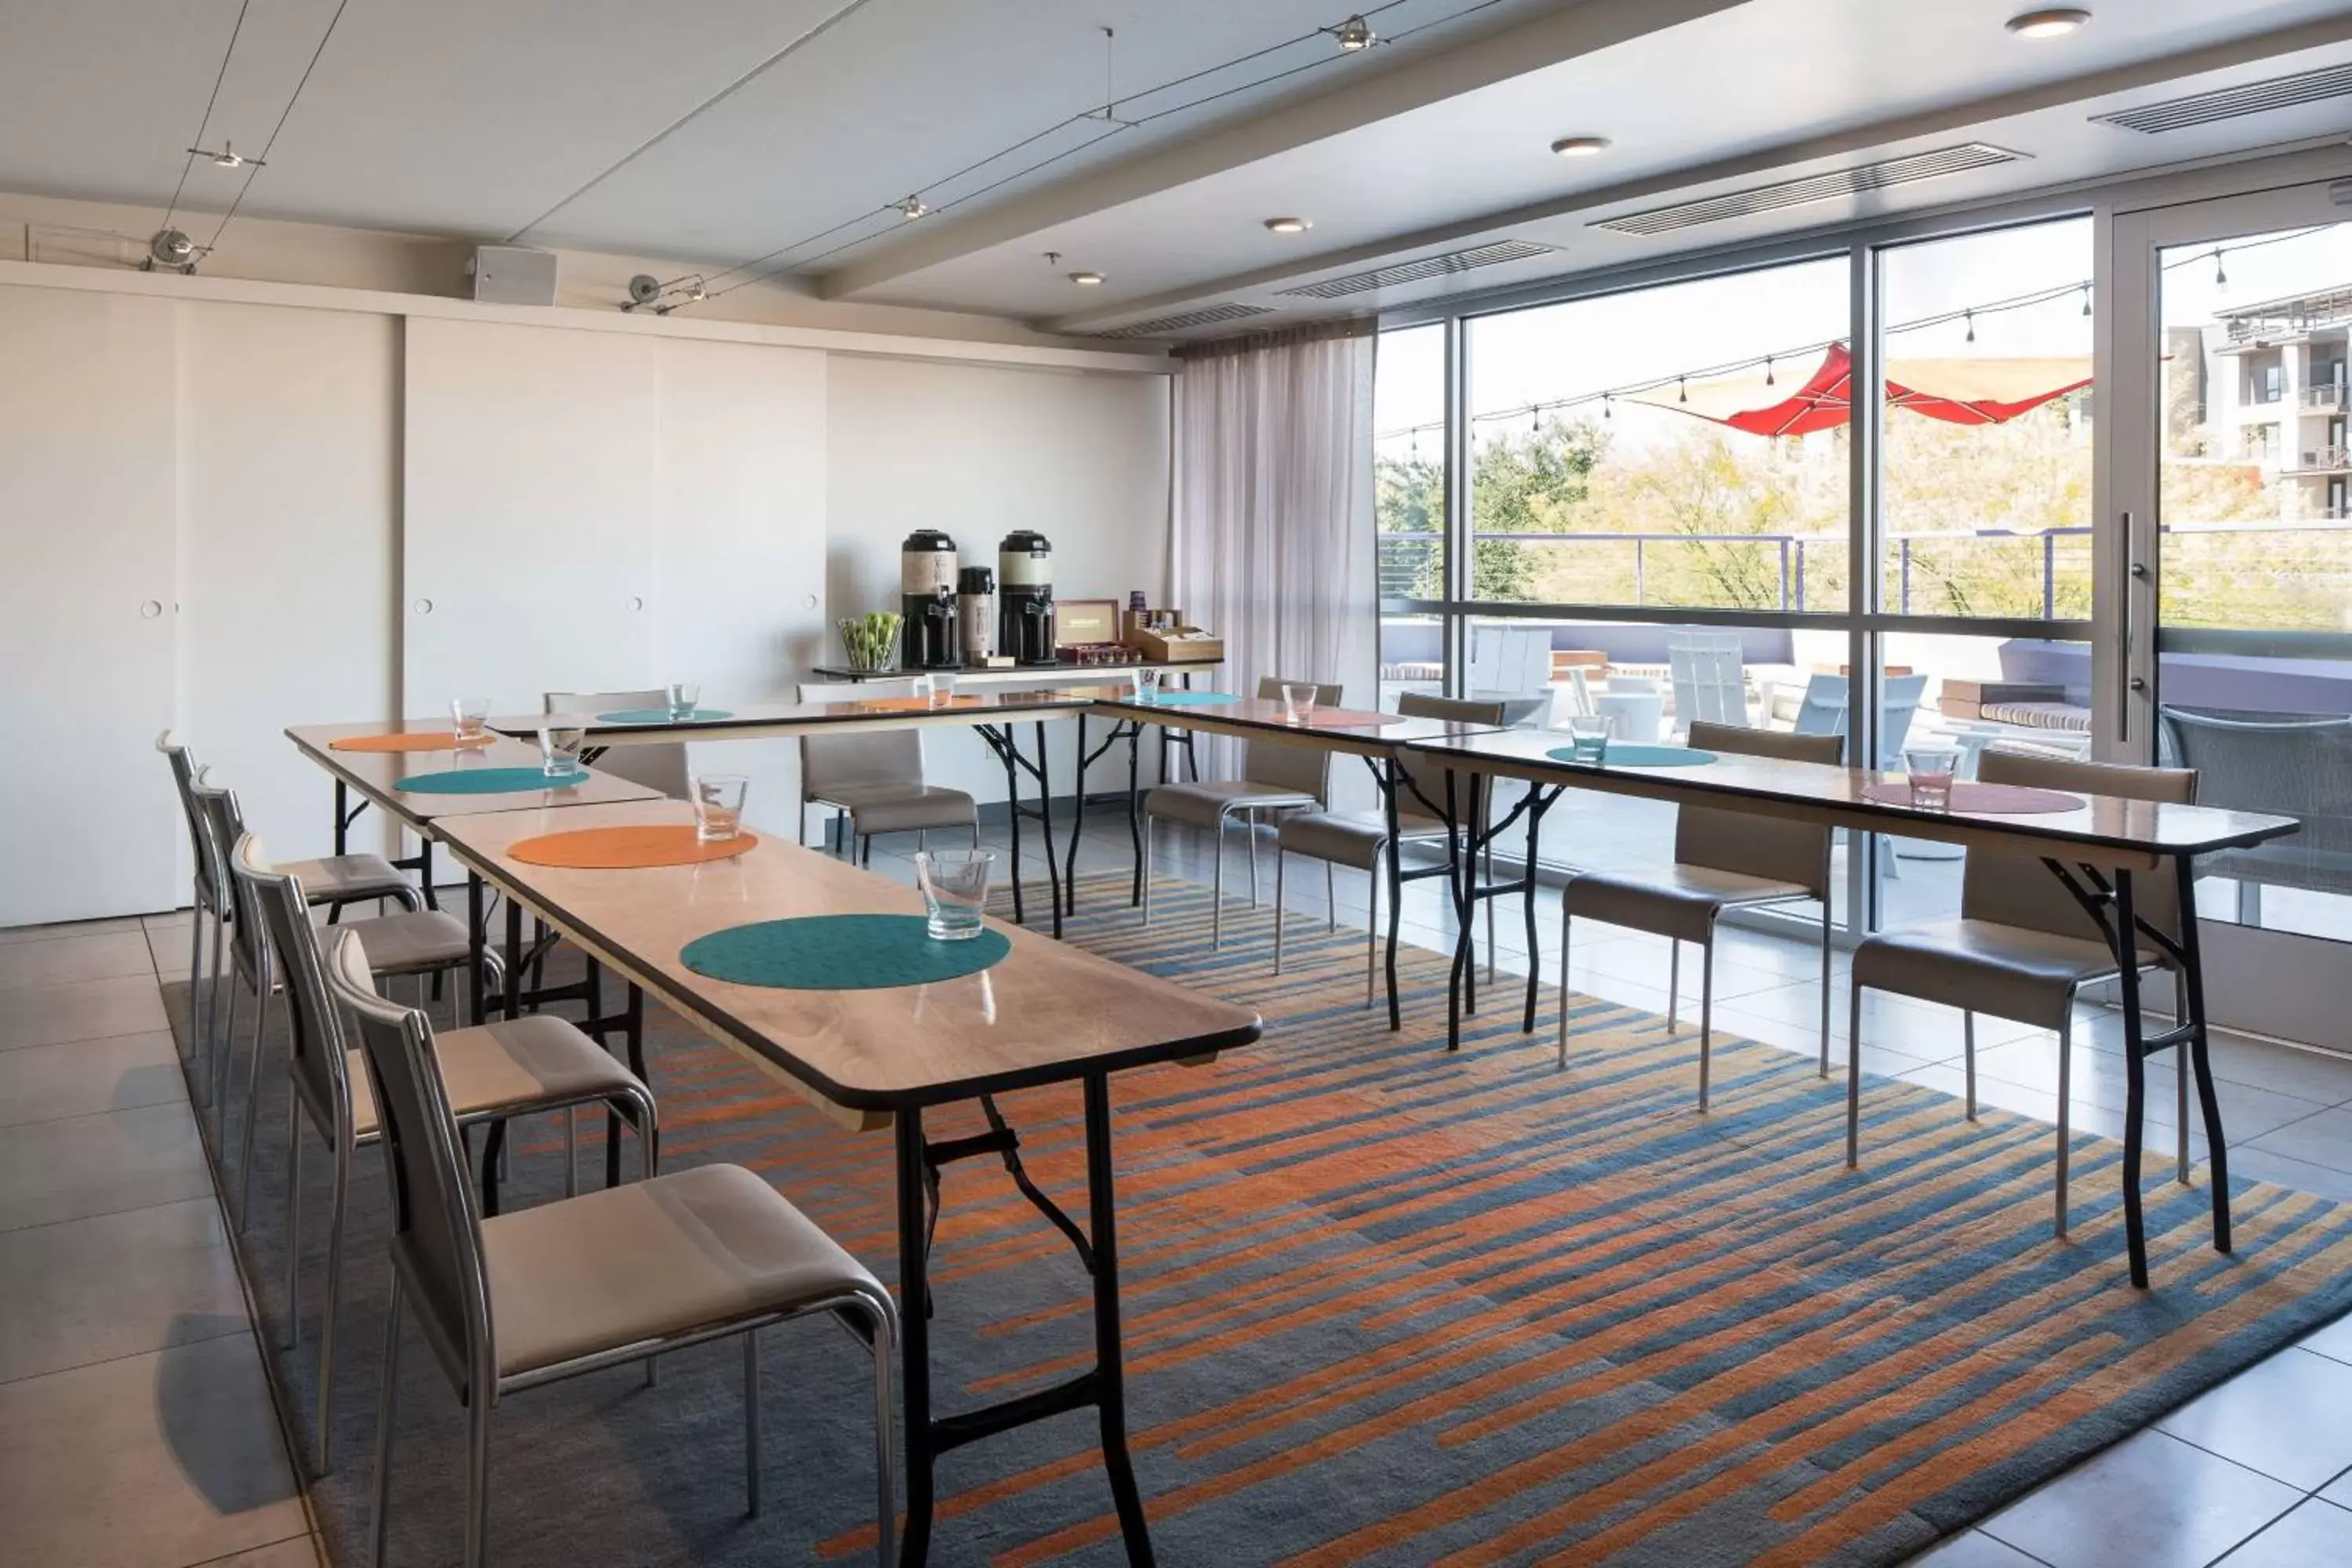 Meeting/conference room in Aloft Scottsdale